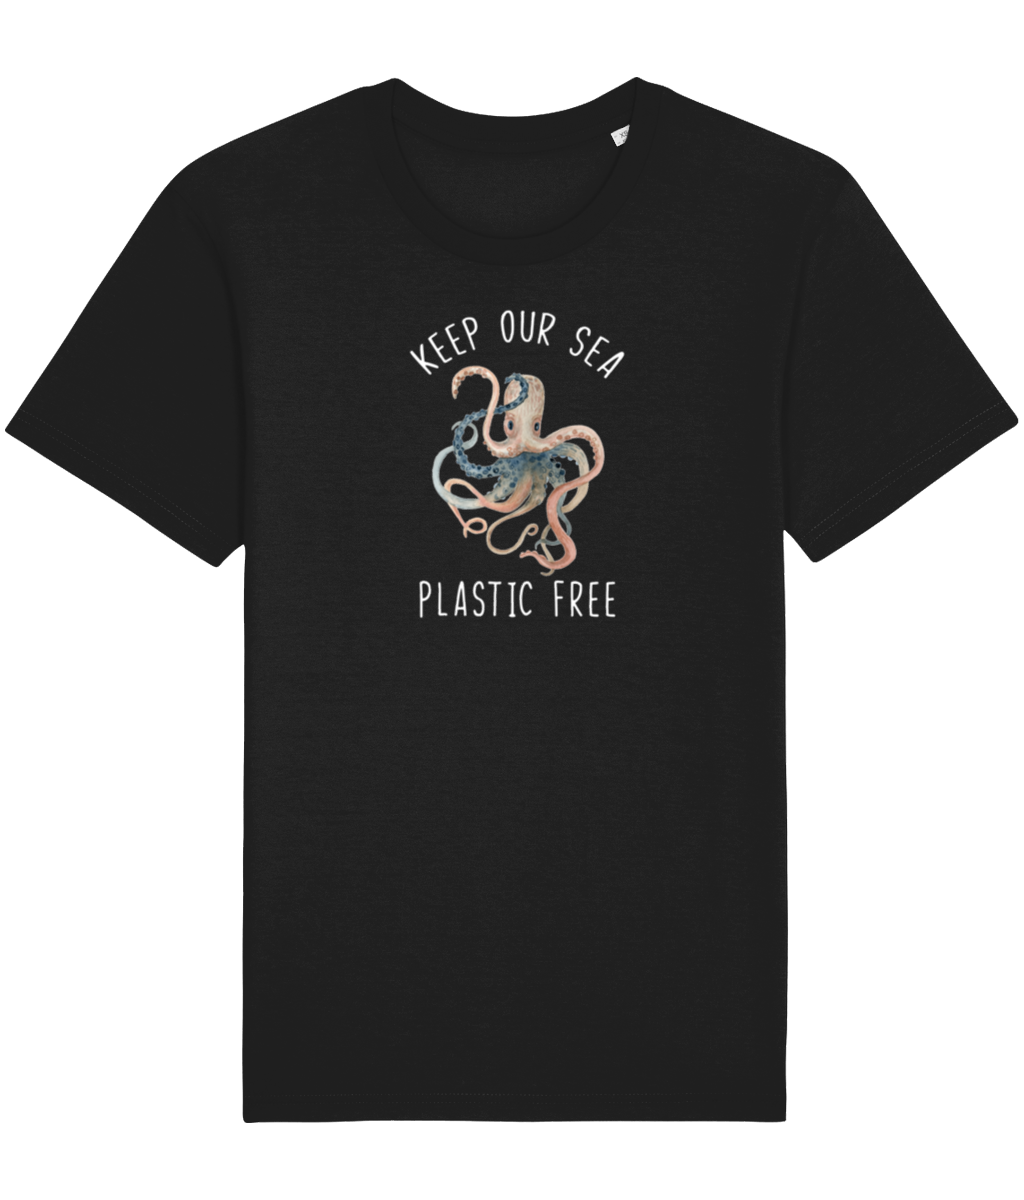 Black unisex vegan shirt with a picture of an octopus and the words keep our sea plastic free.